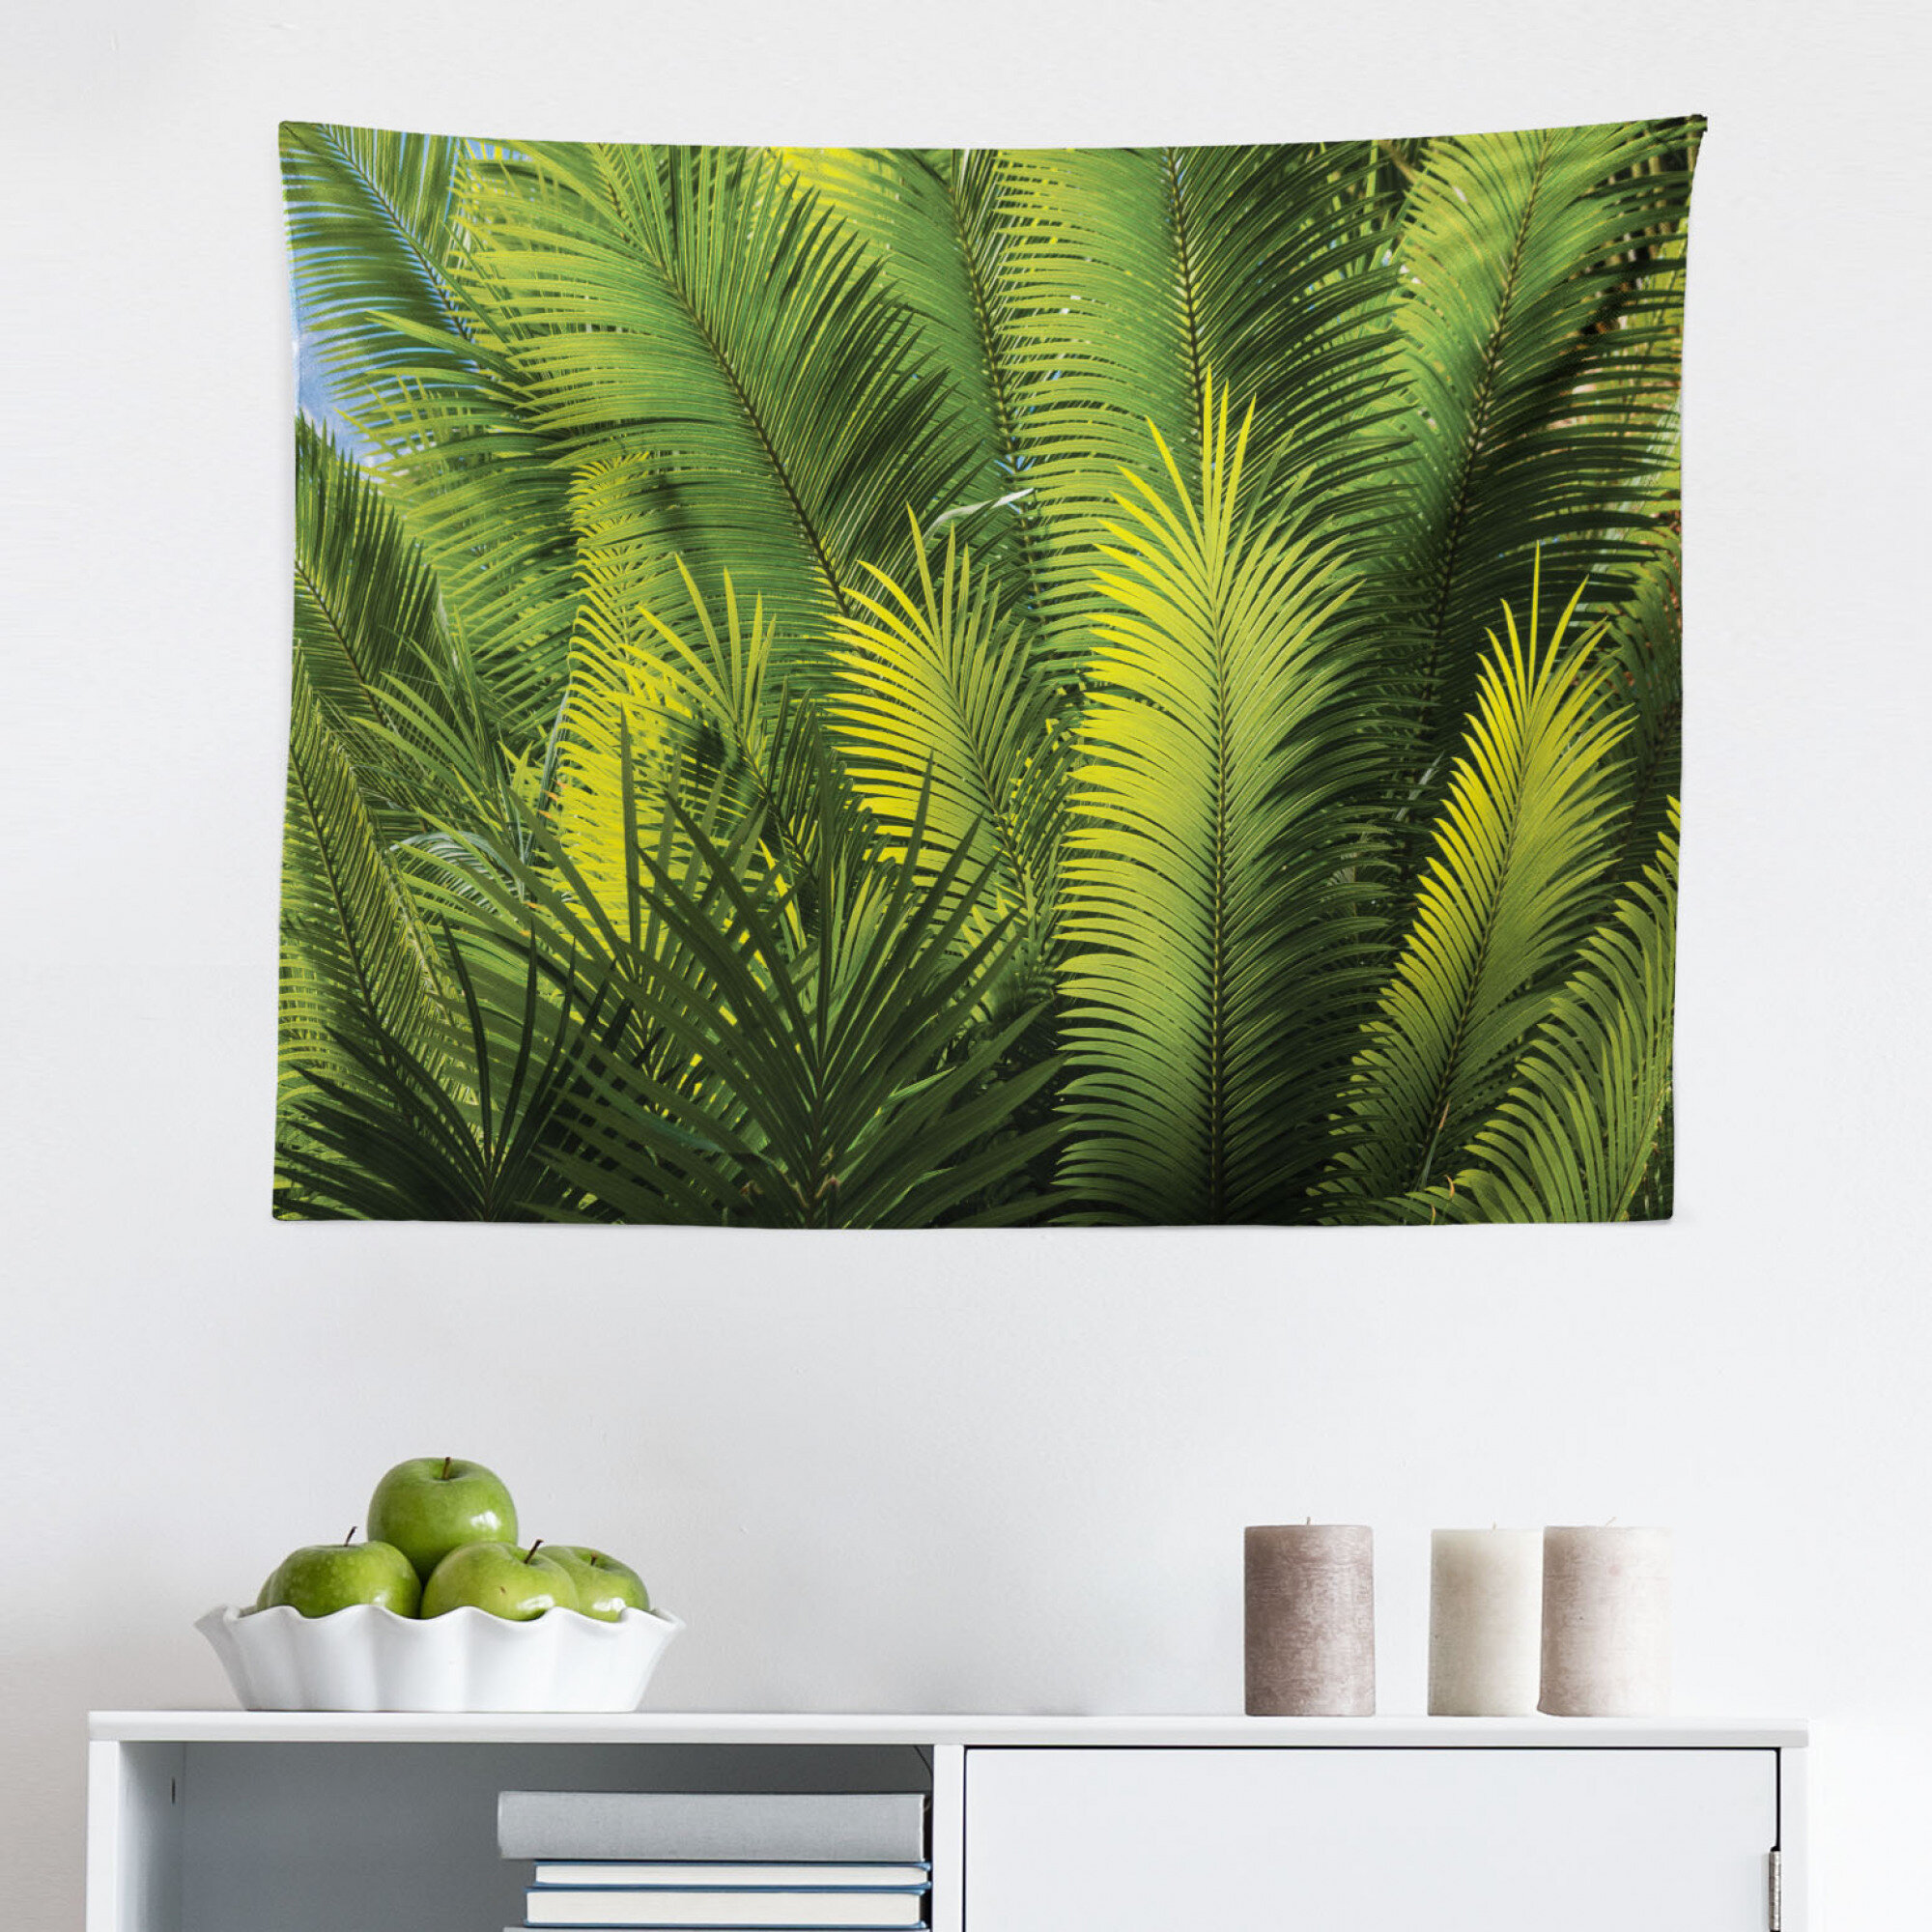 Teal Brown Ambesonne Palm Tree Tapestry 60 X 80 Wall Hanging for Bedroom Living Room Dorm Decor Summer Beach Vintage Style Tropical Sunset Picture Print 